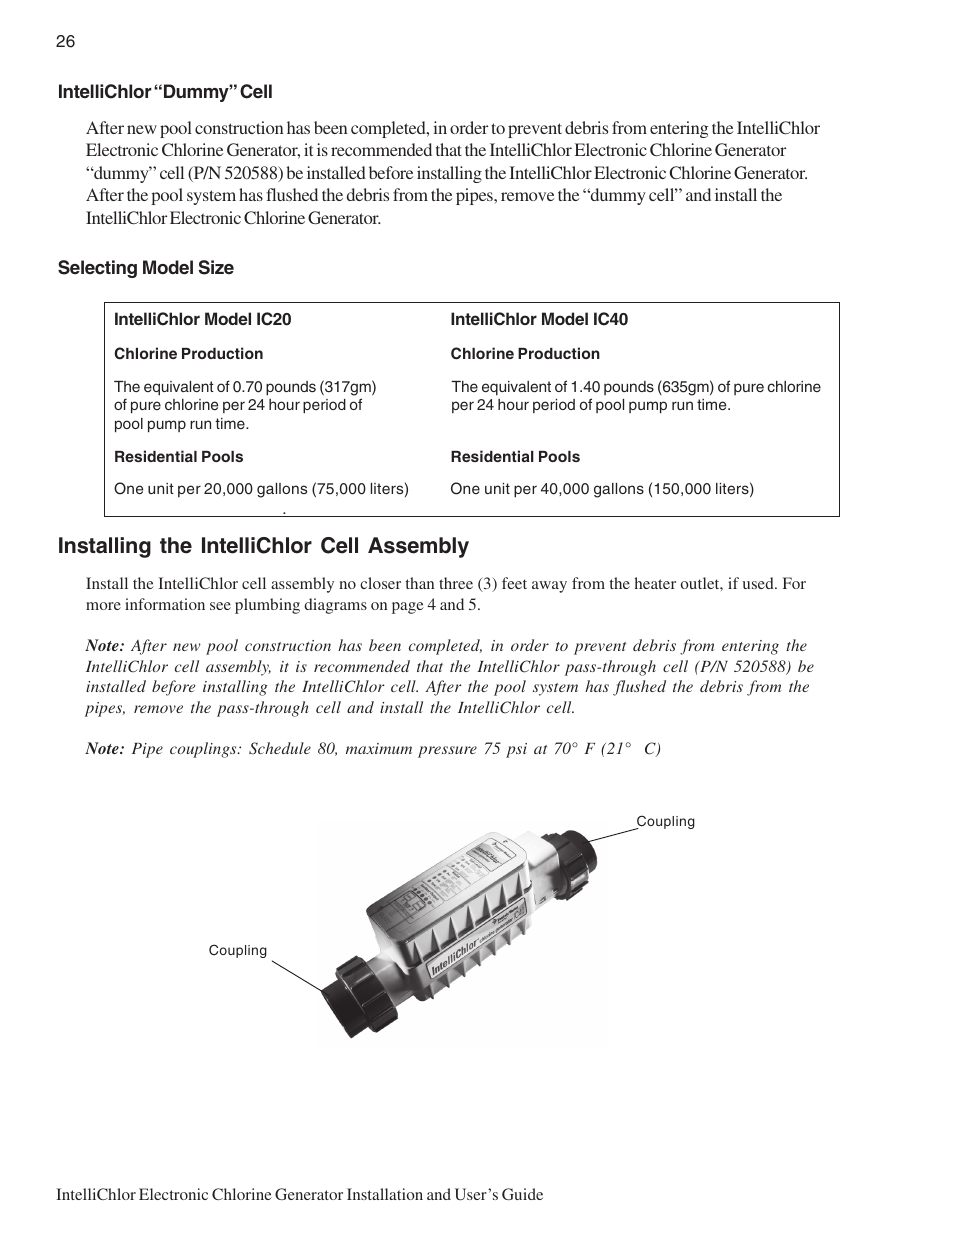 Installing the intellichlor cell assembly | Pentair IC20 User Manual